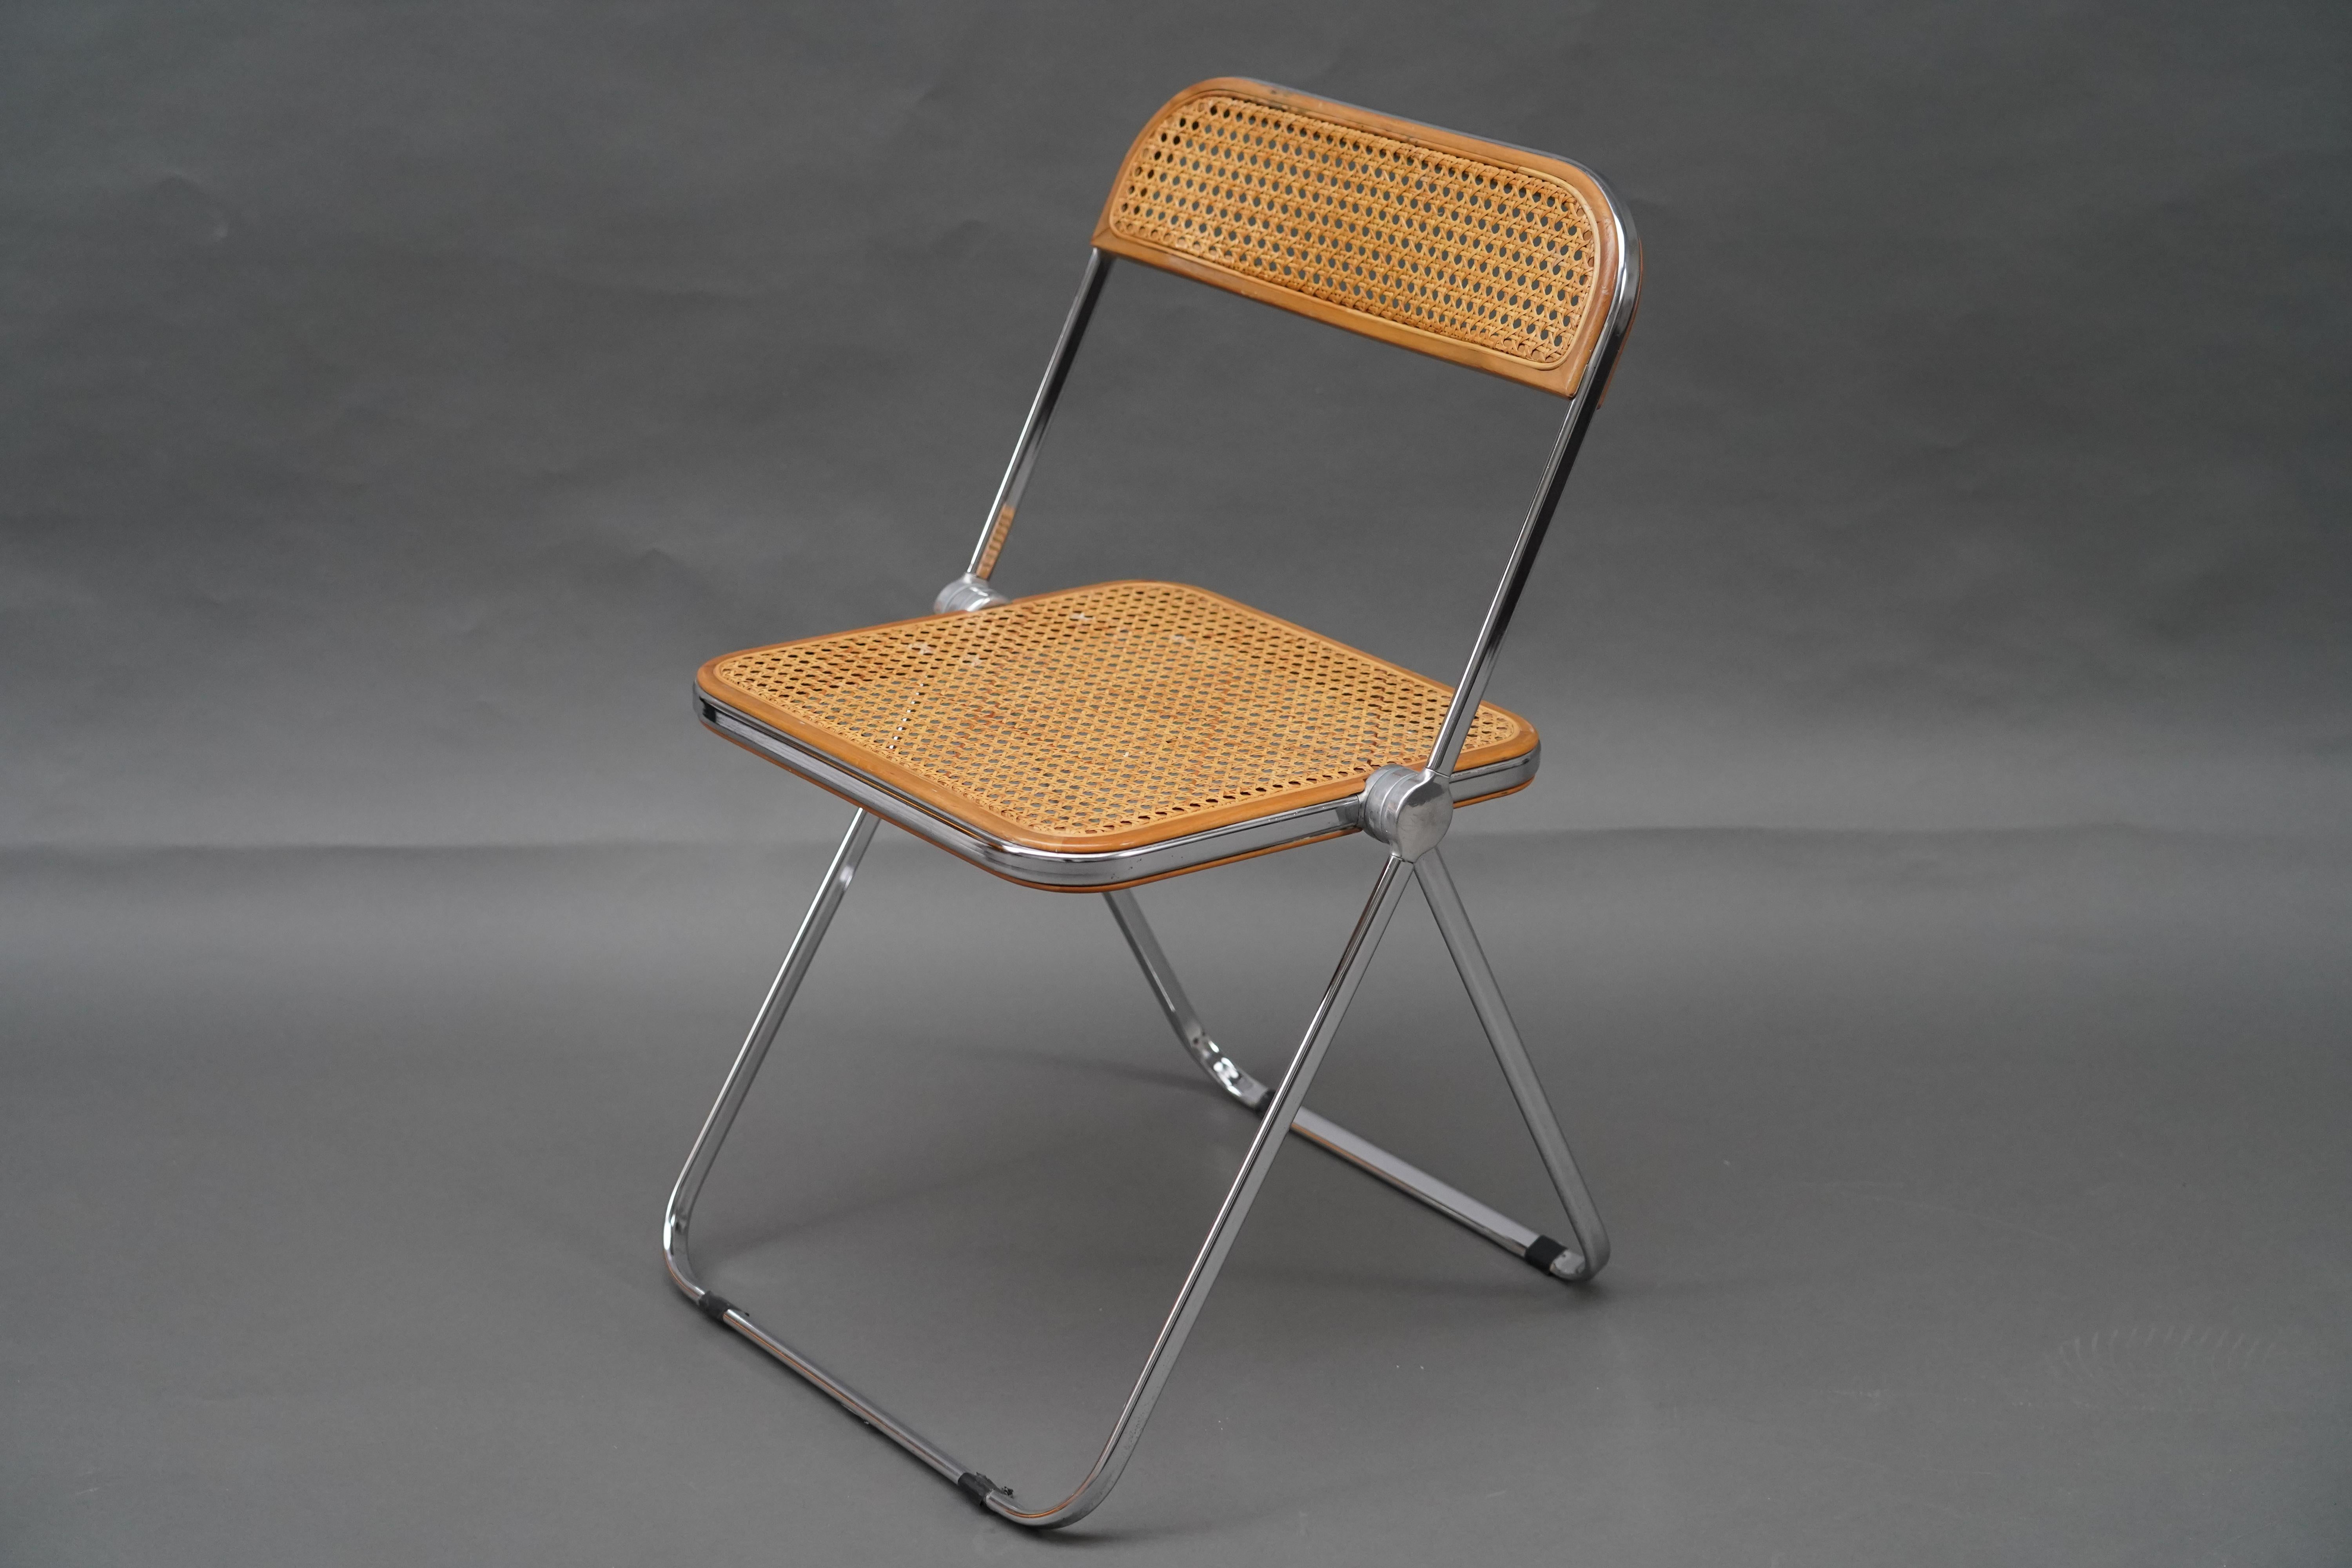 Set of 4 “Plia” model folding chairs from the 1960s with Viennese canework and chrome tubes.
These iconic Italian chairs were designed by Giancarlo Piretti for Castelli in 1967.

Giancarlo Piretti was born in Bologna in 1940. He attended the